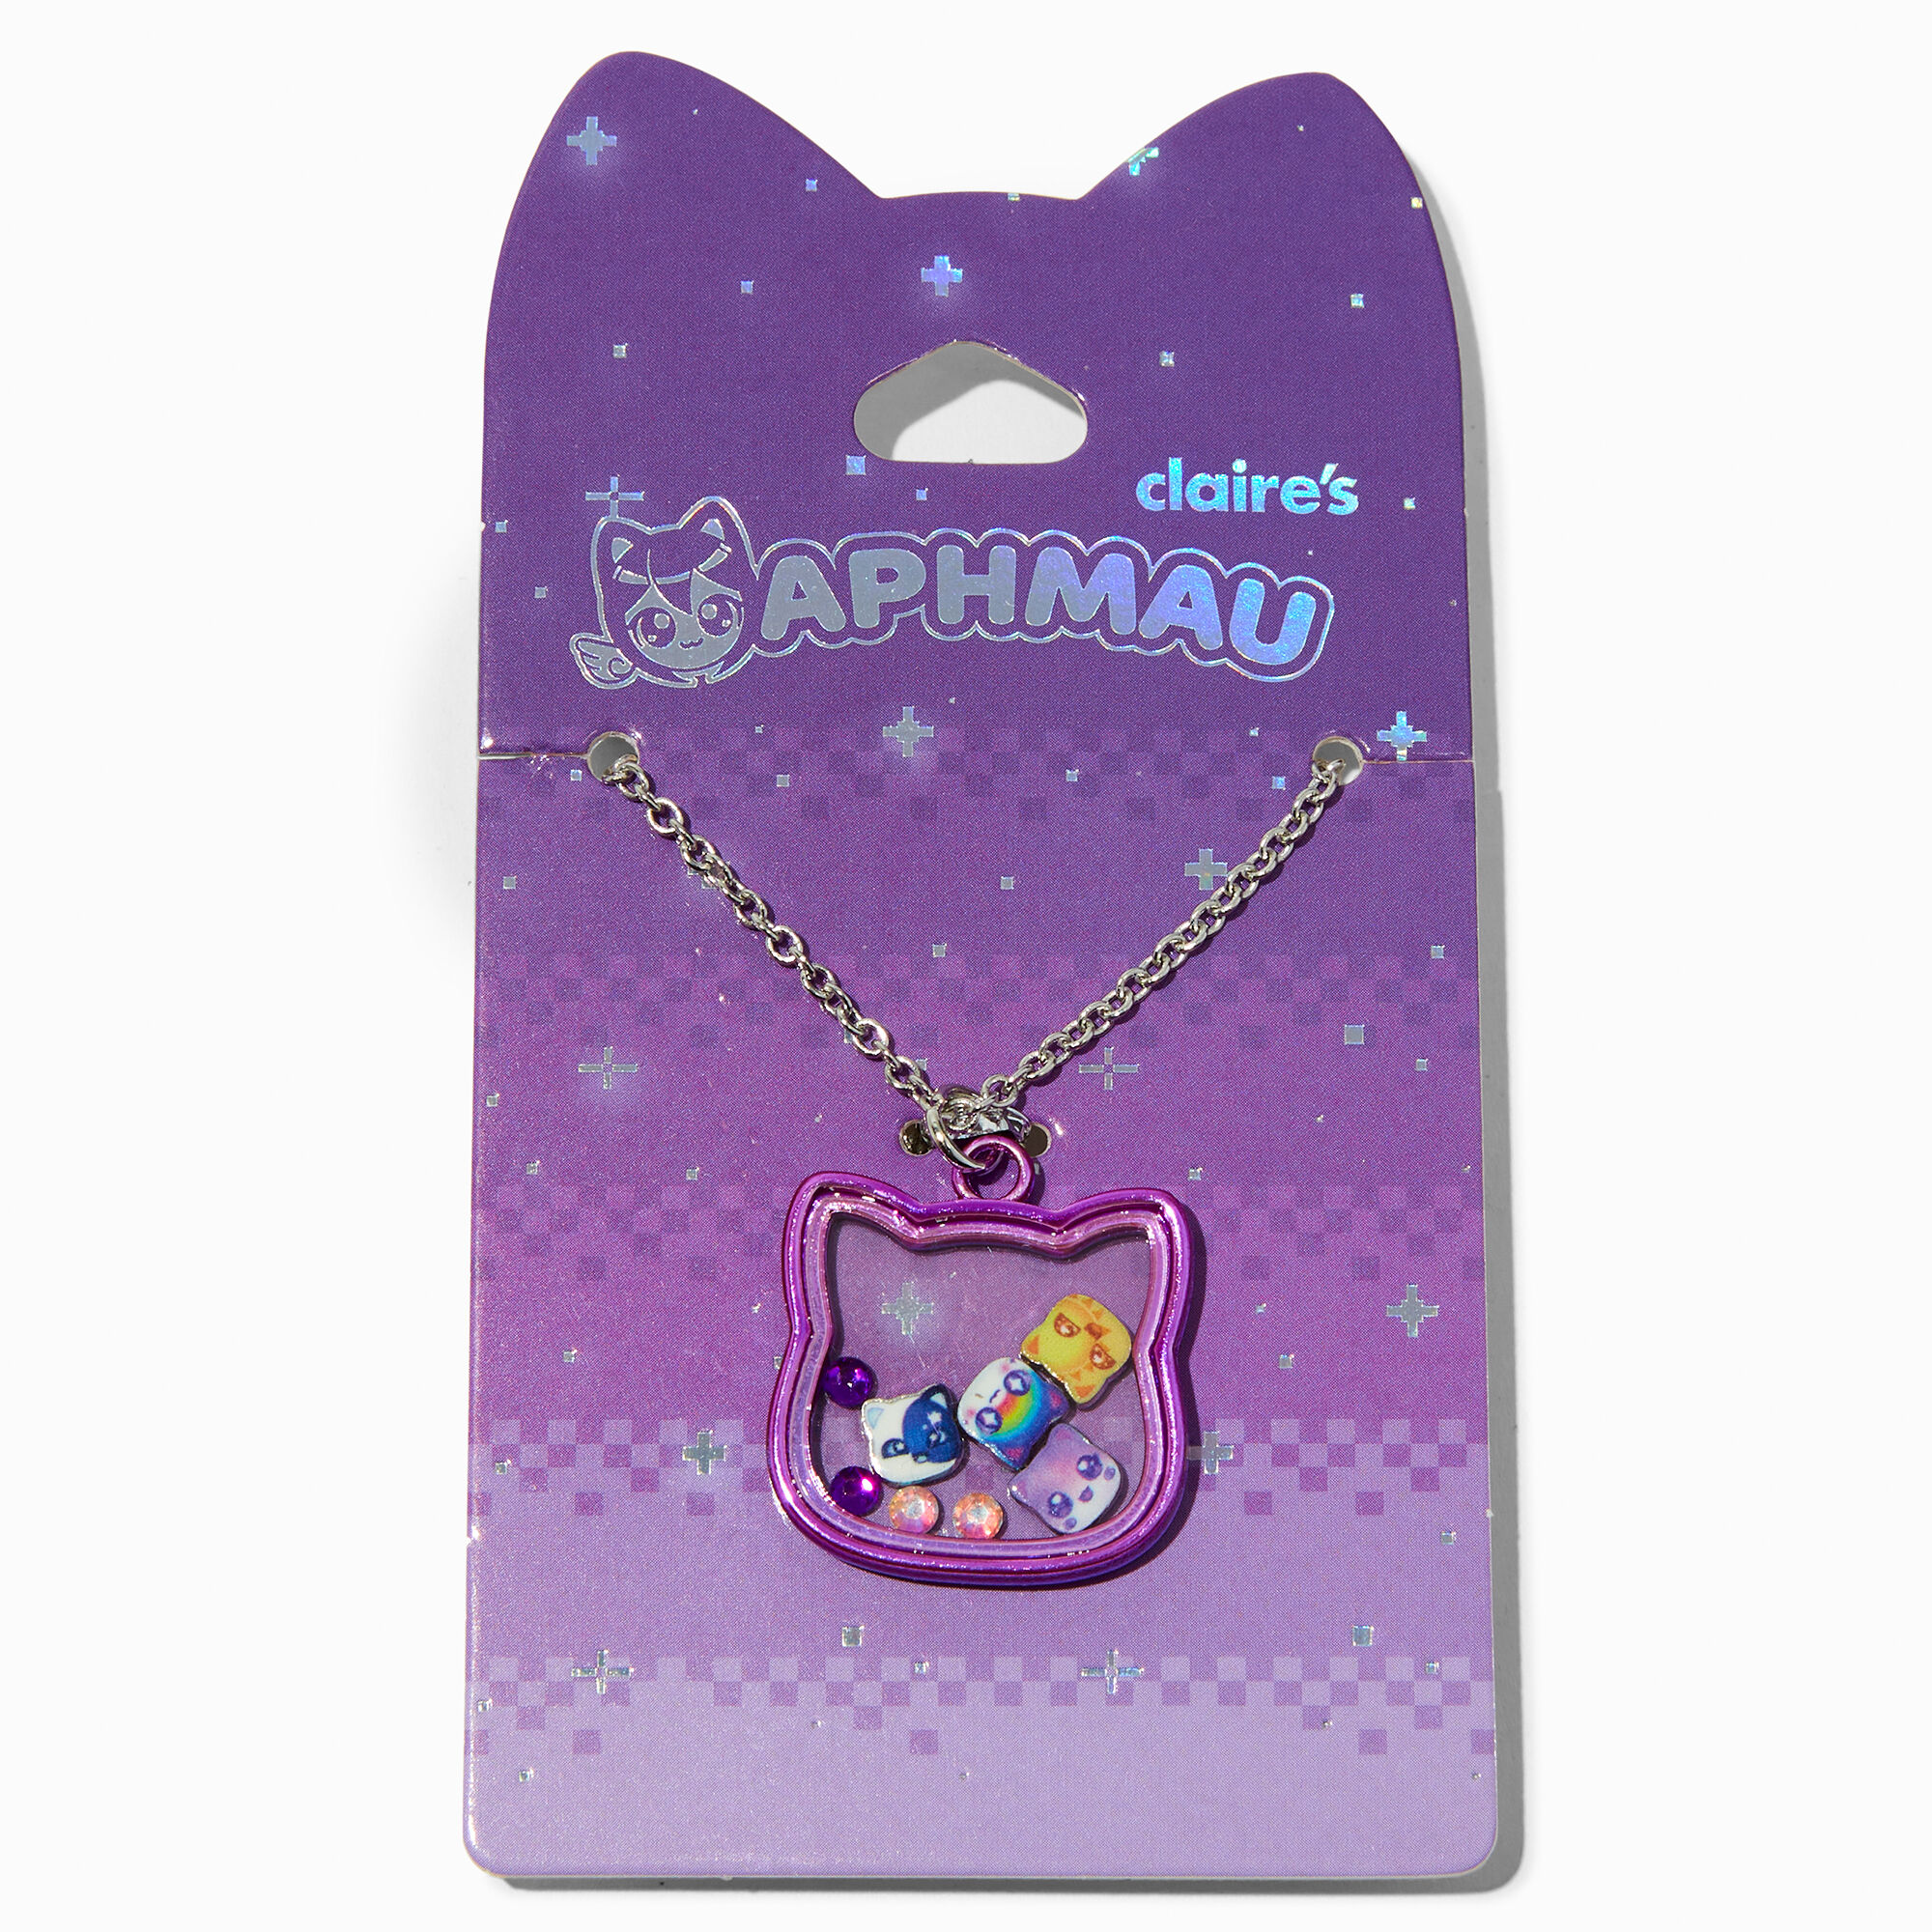 View Claires Aphmau Cat Head Shaker Pendant Necklace Silver information